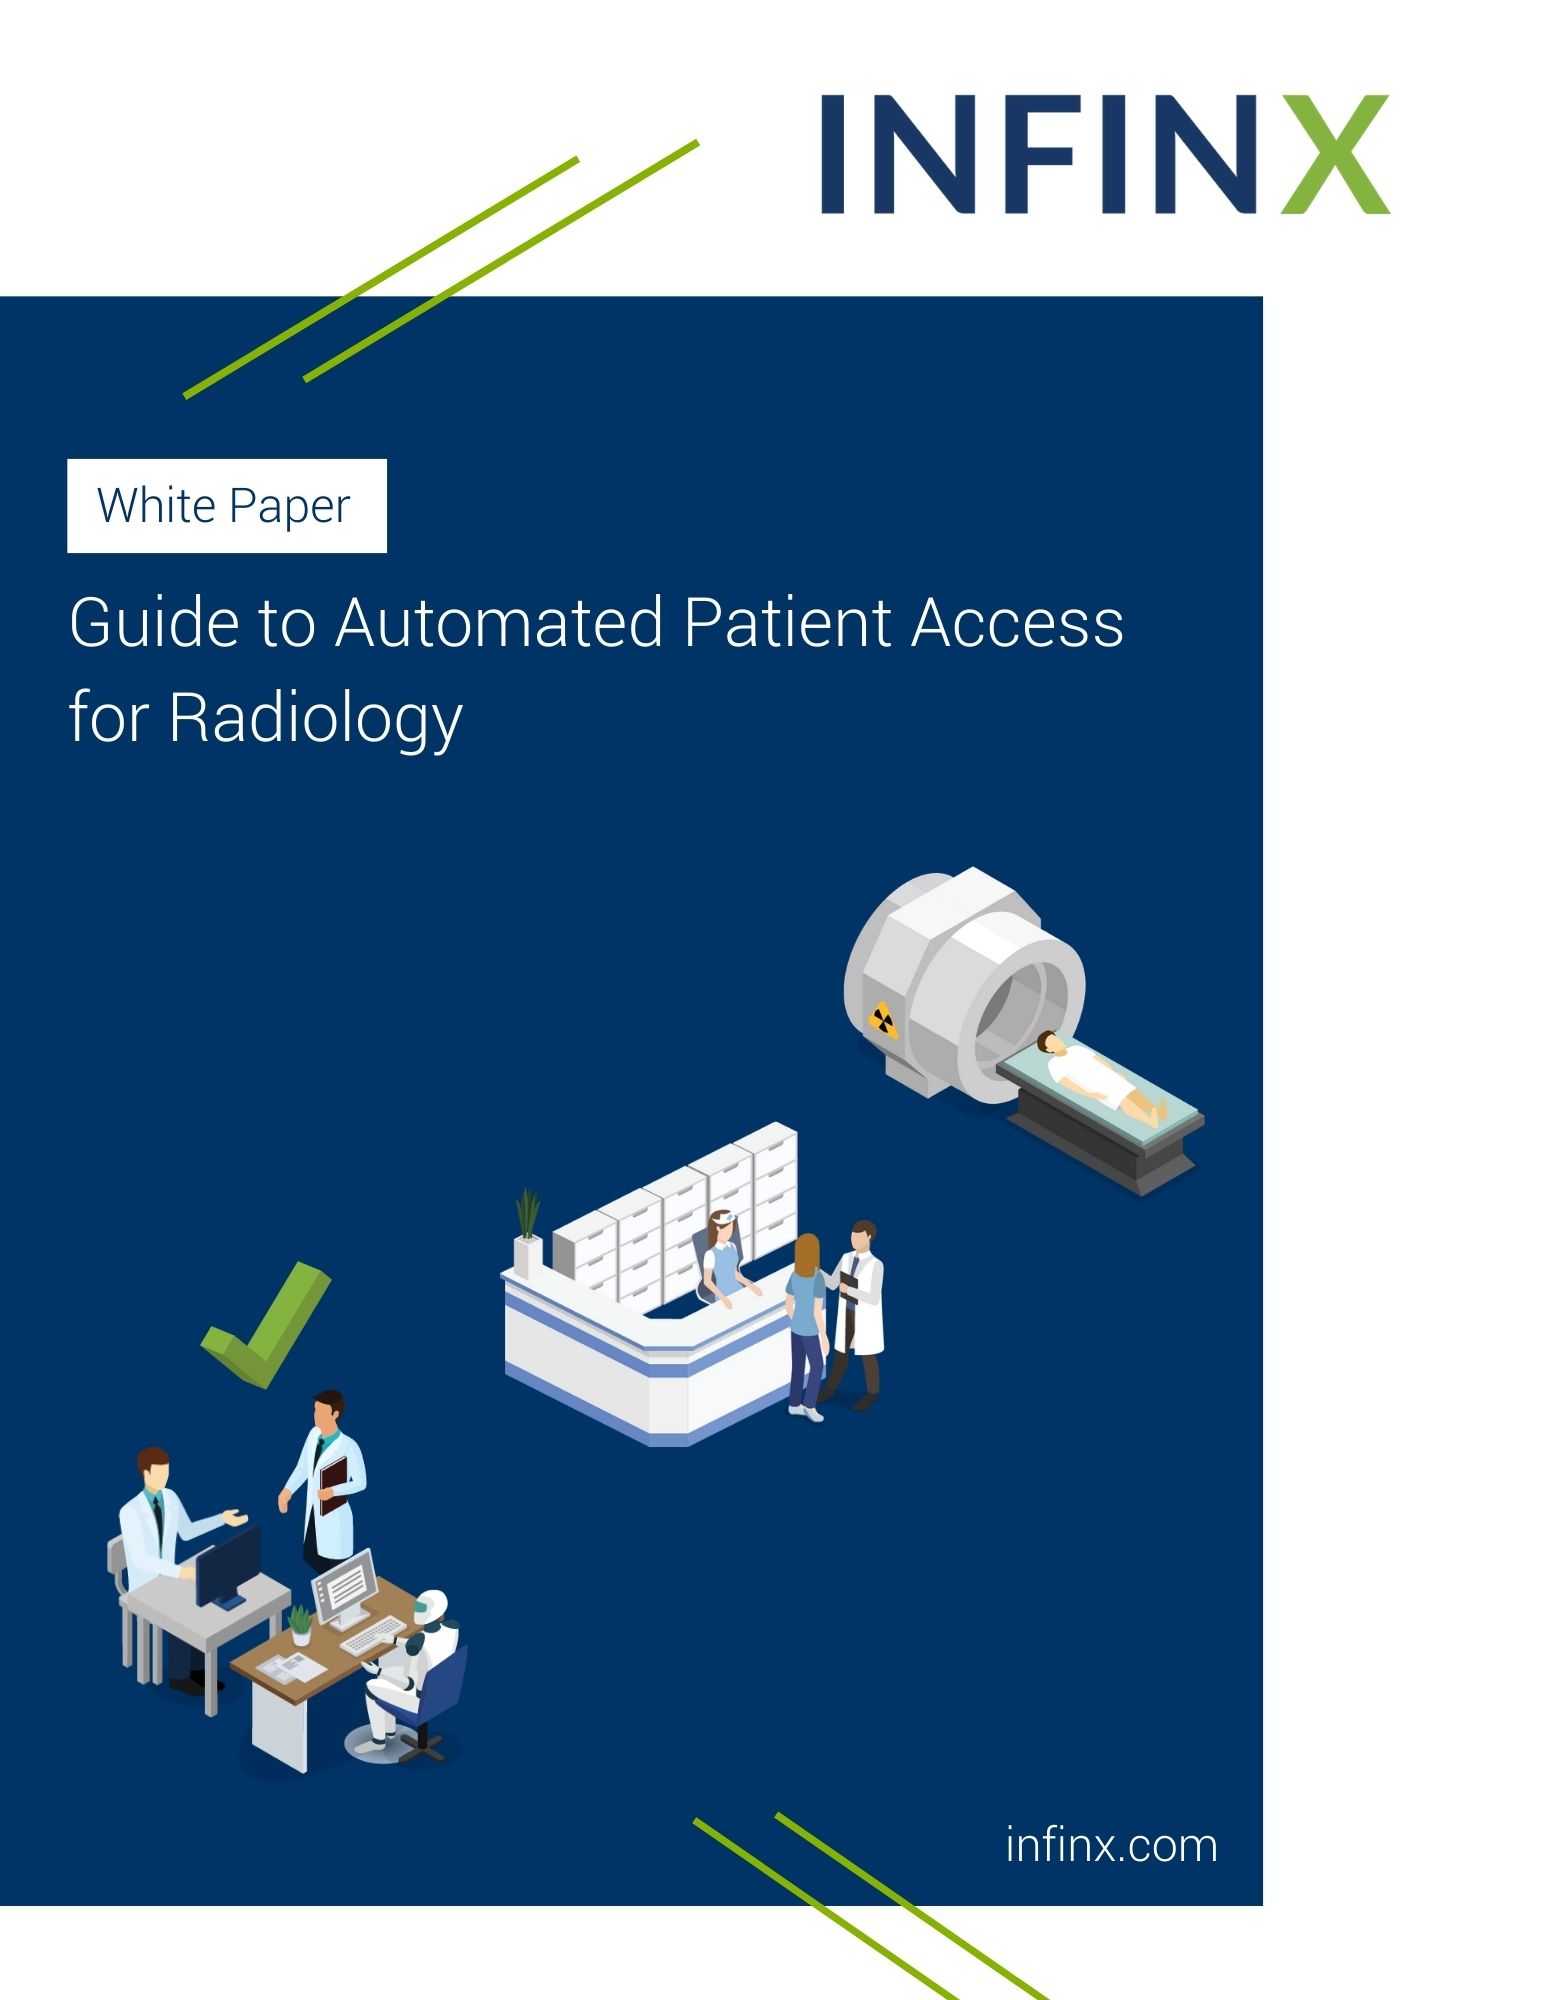 Infinx - White Paper - Guide to Automated Patient Access for Radiology - May 2021 1